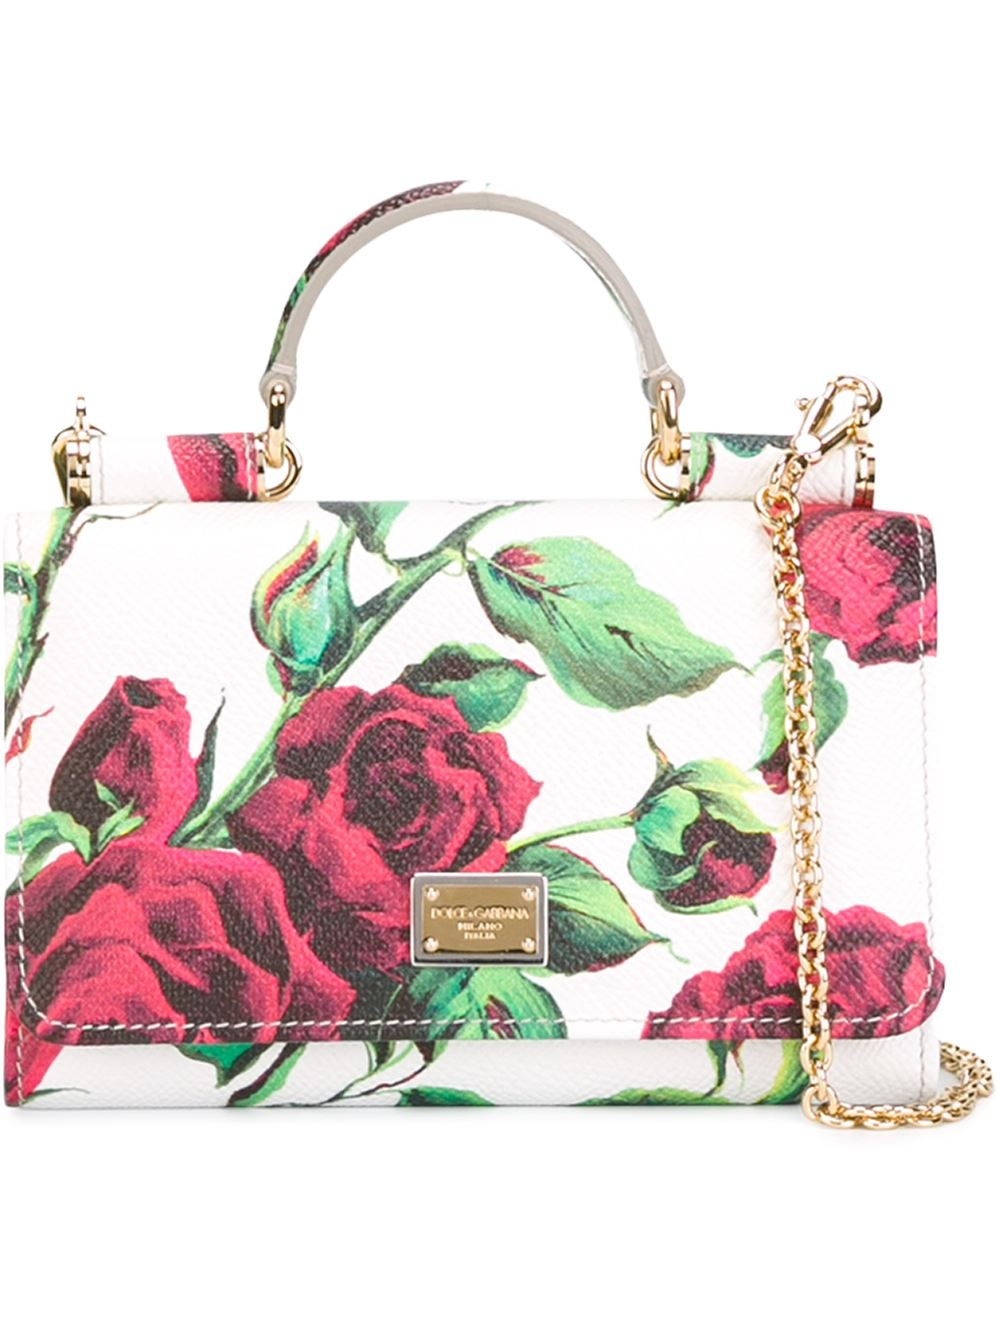 Lyst - Dolce & Gabbana Small 'Miss Sicily' Shoulder Bag in White